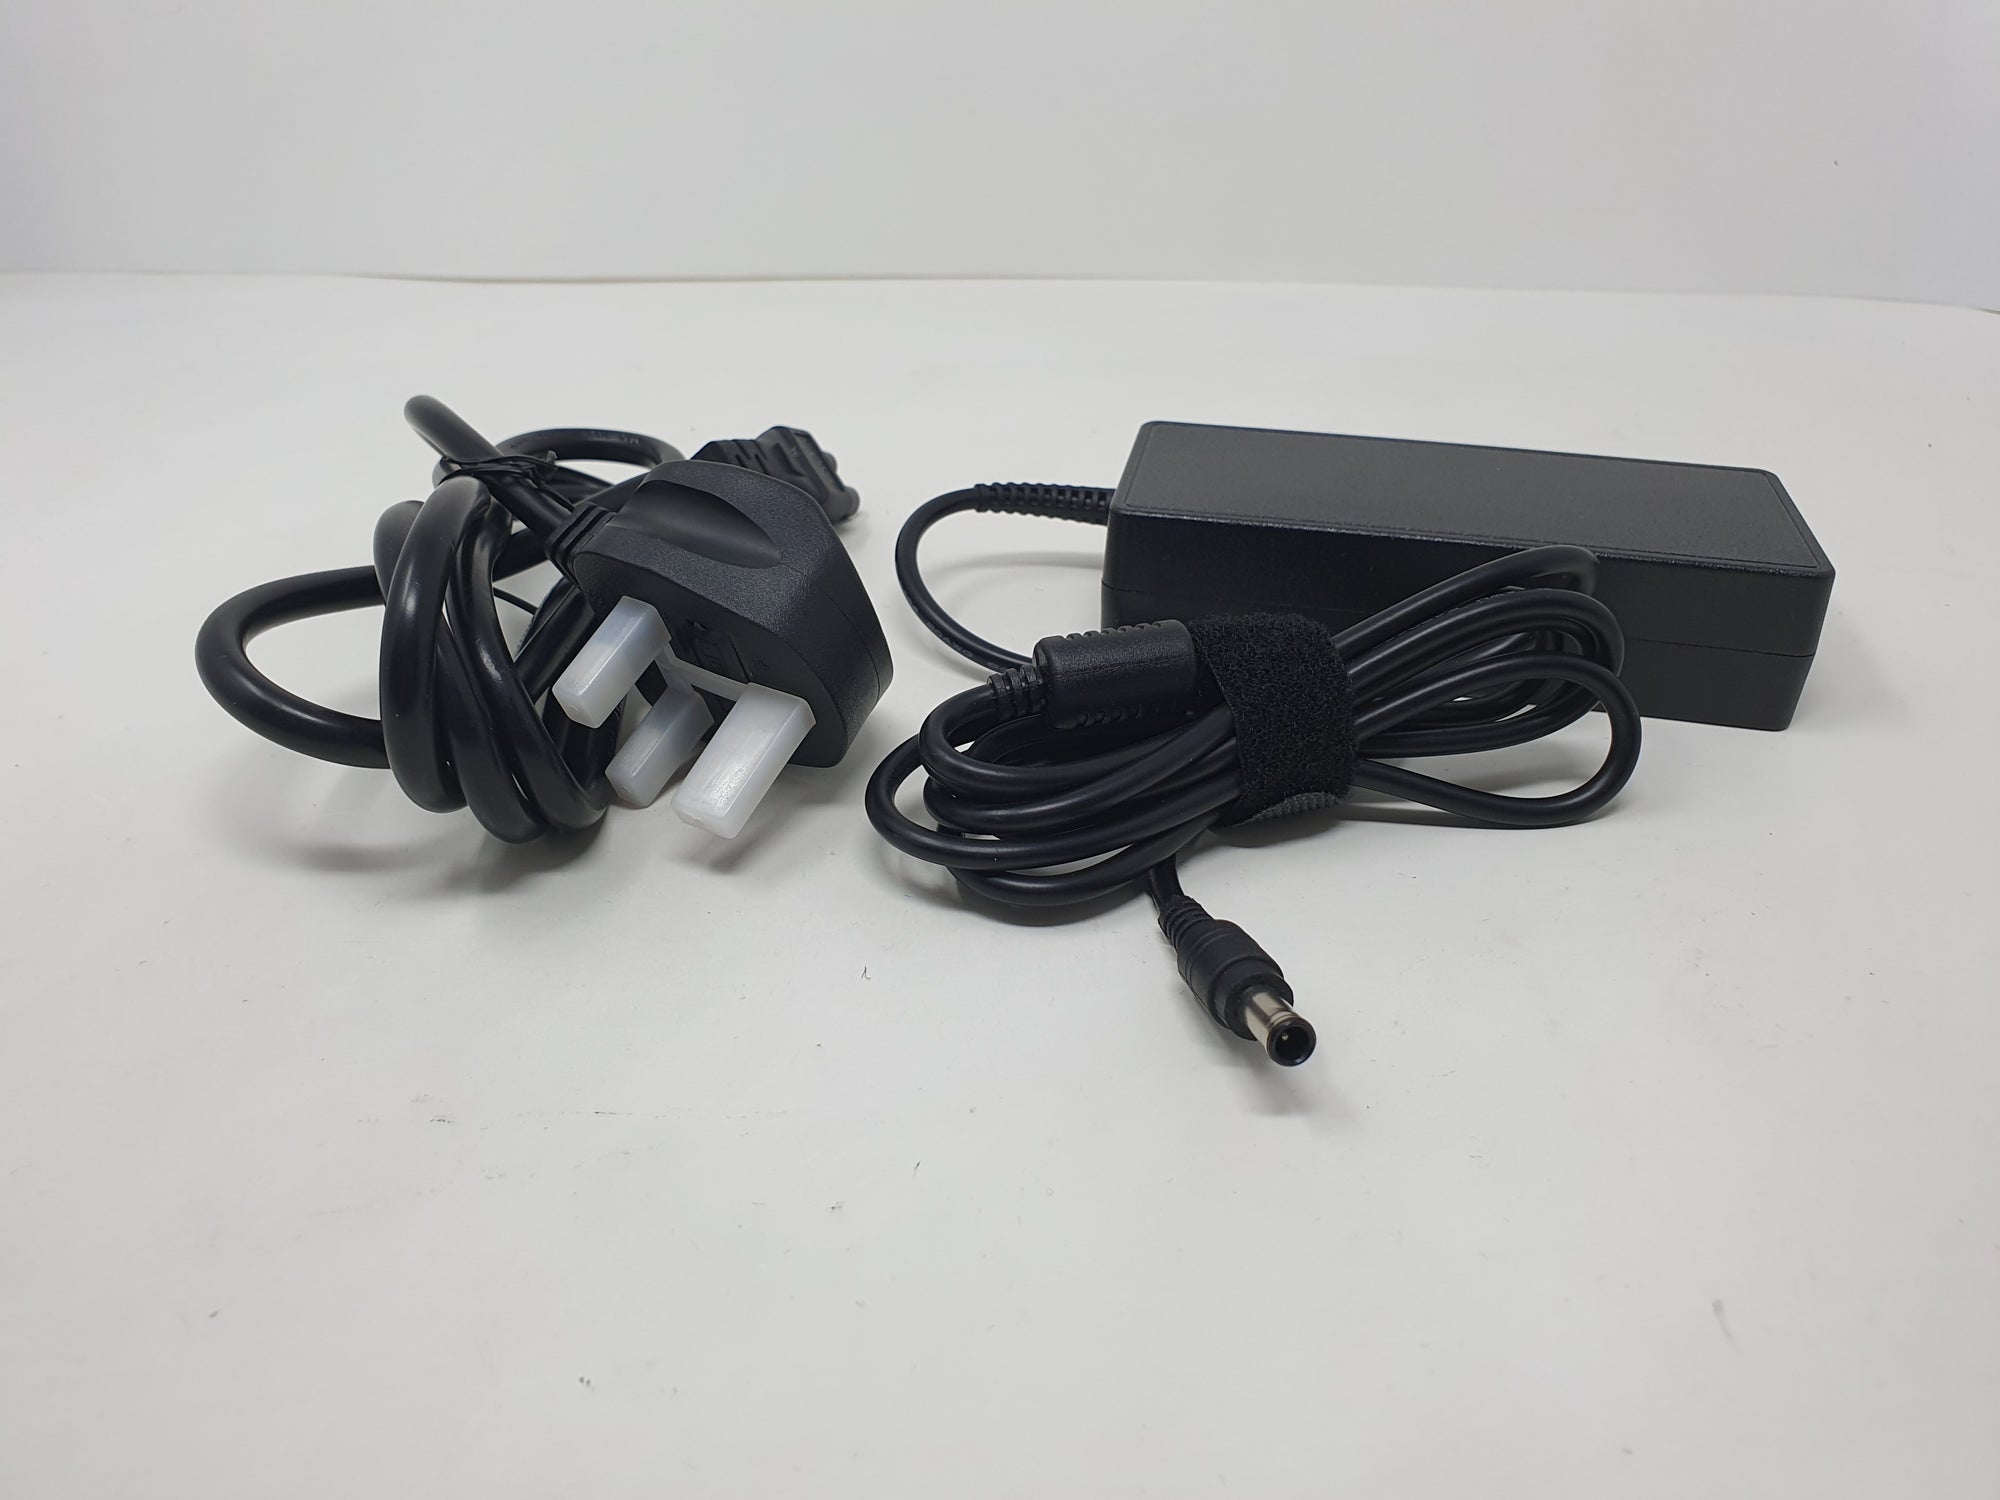 SONY Laptop Charger Power Adaptor 19.5V 3.95A